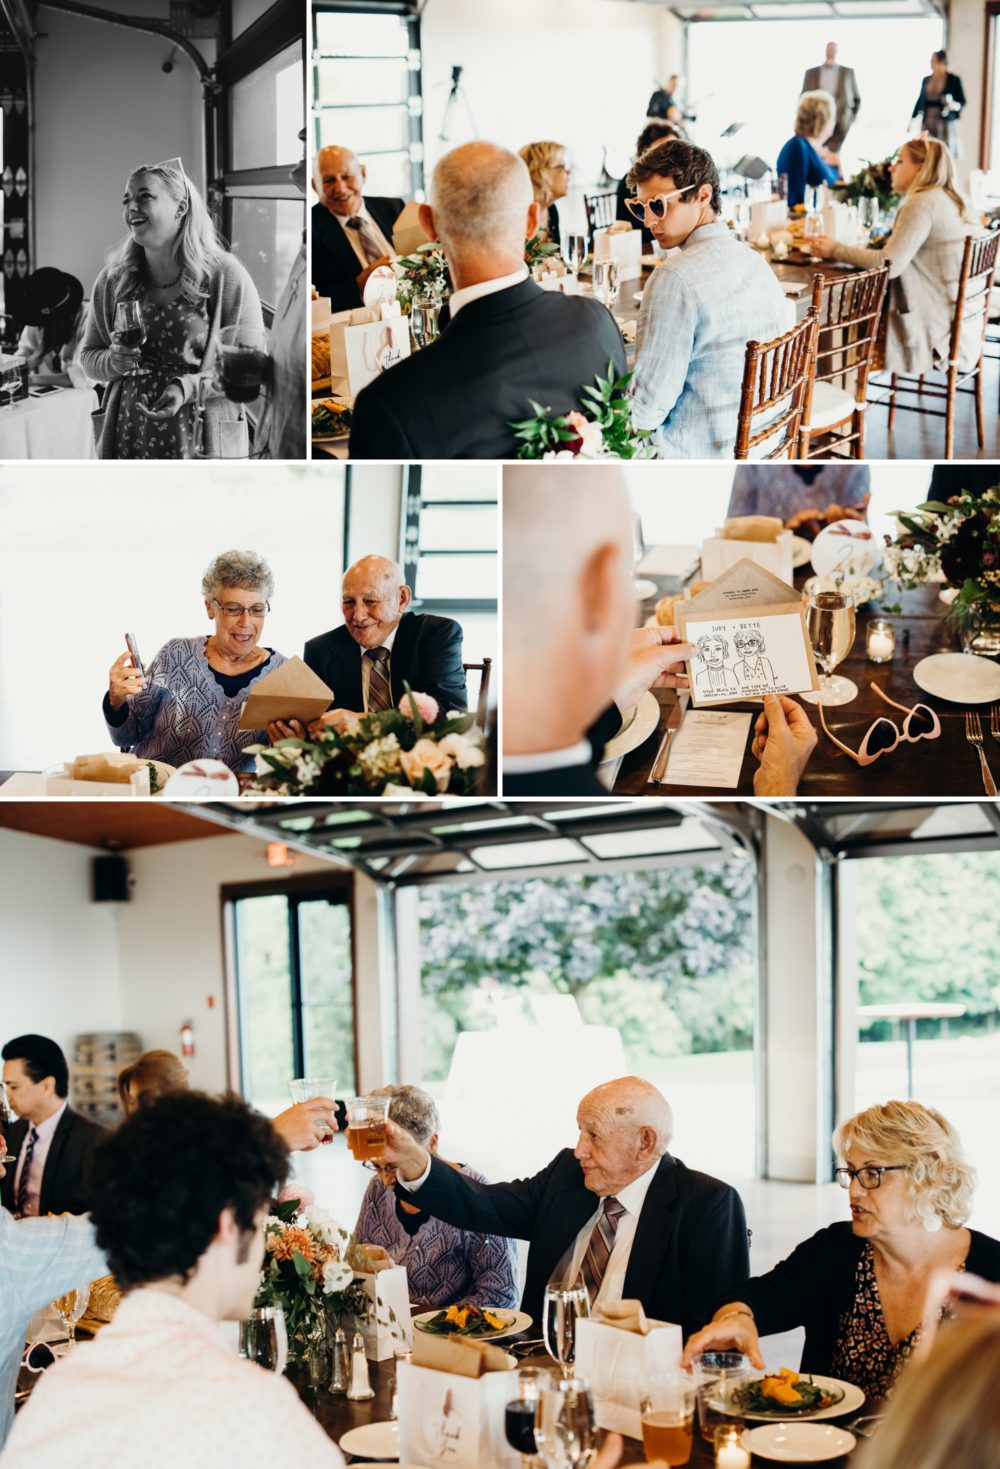 Wedding reception shenanigans at Youngberg Hill - by Pacific Northwest Wedding Photographer, Briana Morrison